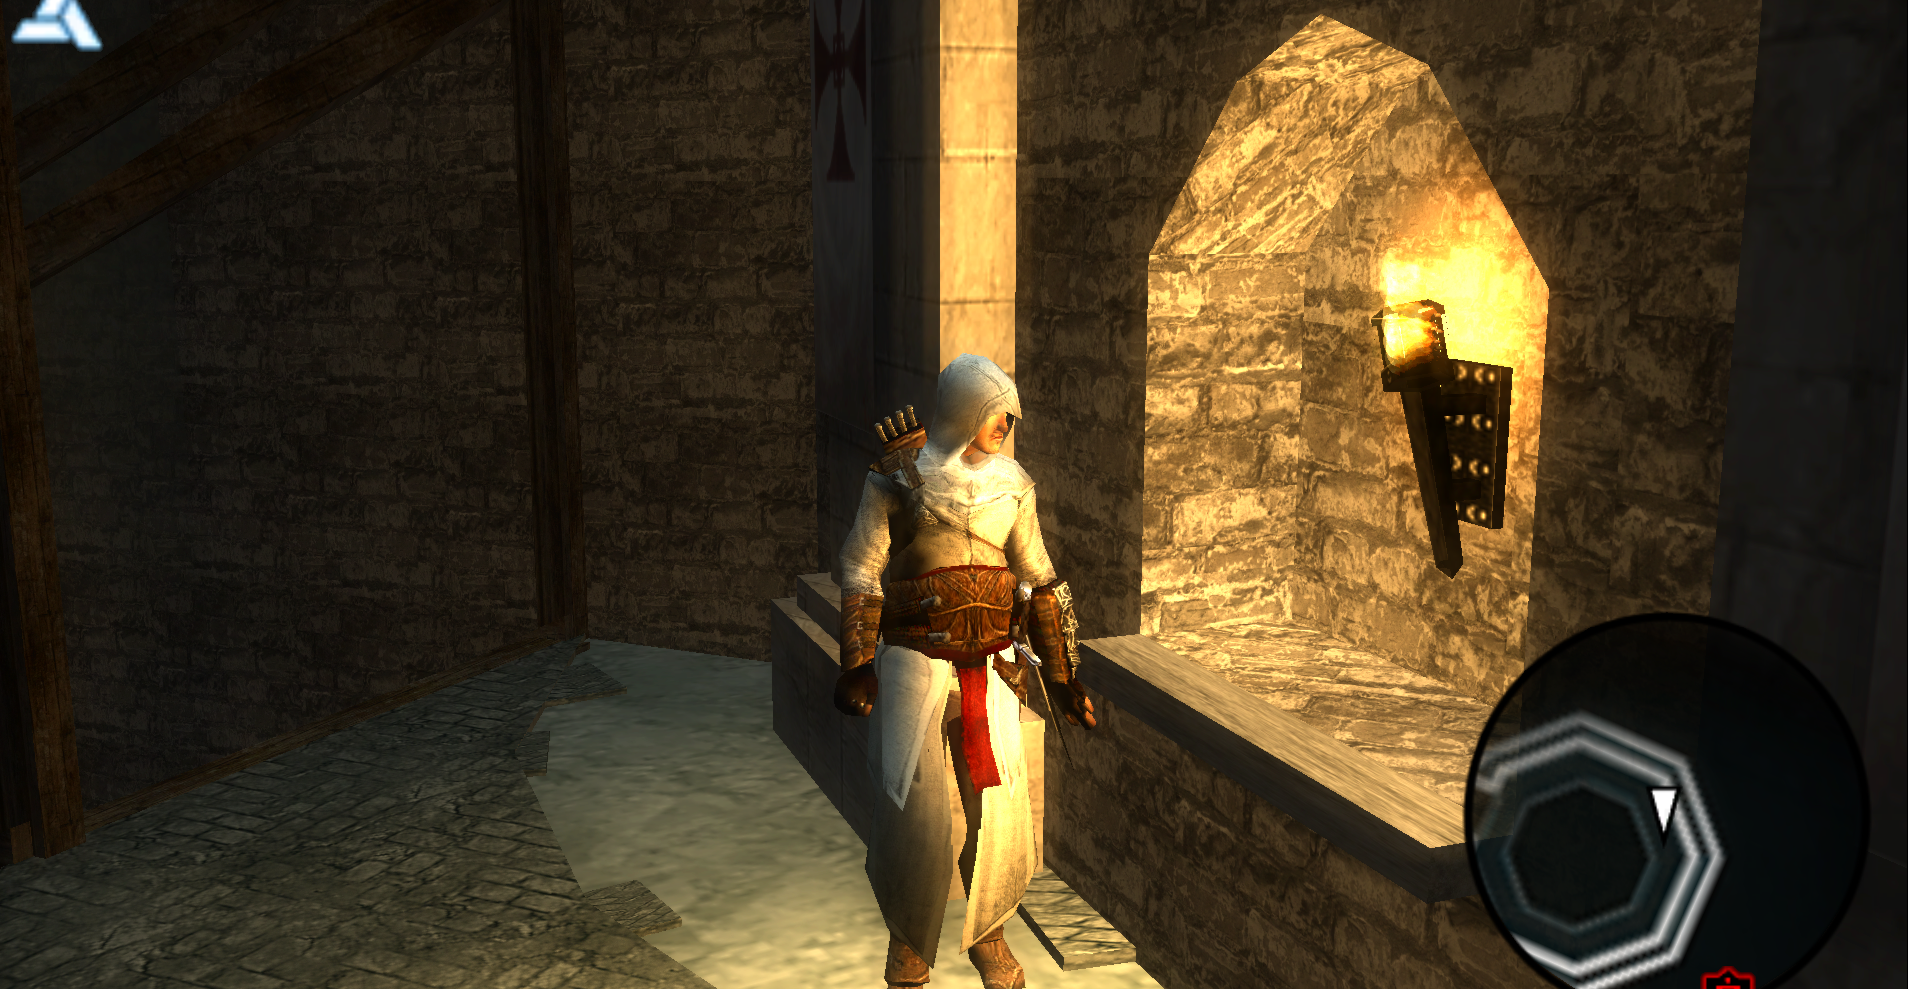 ASSASSIN'S CREED BLOODLINES NO ANDROID PPSSPP 